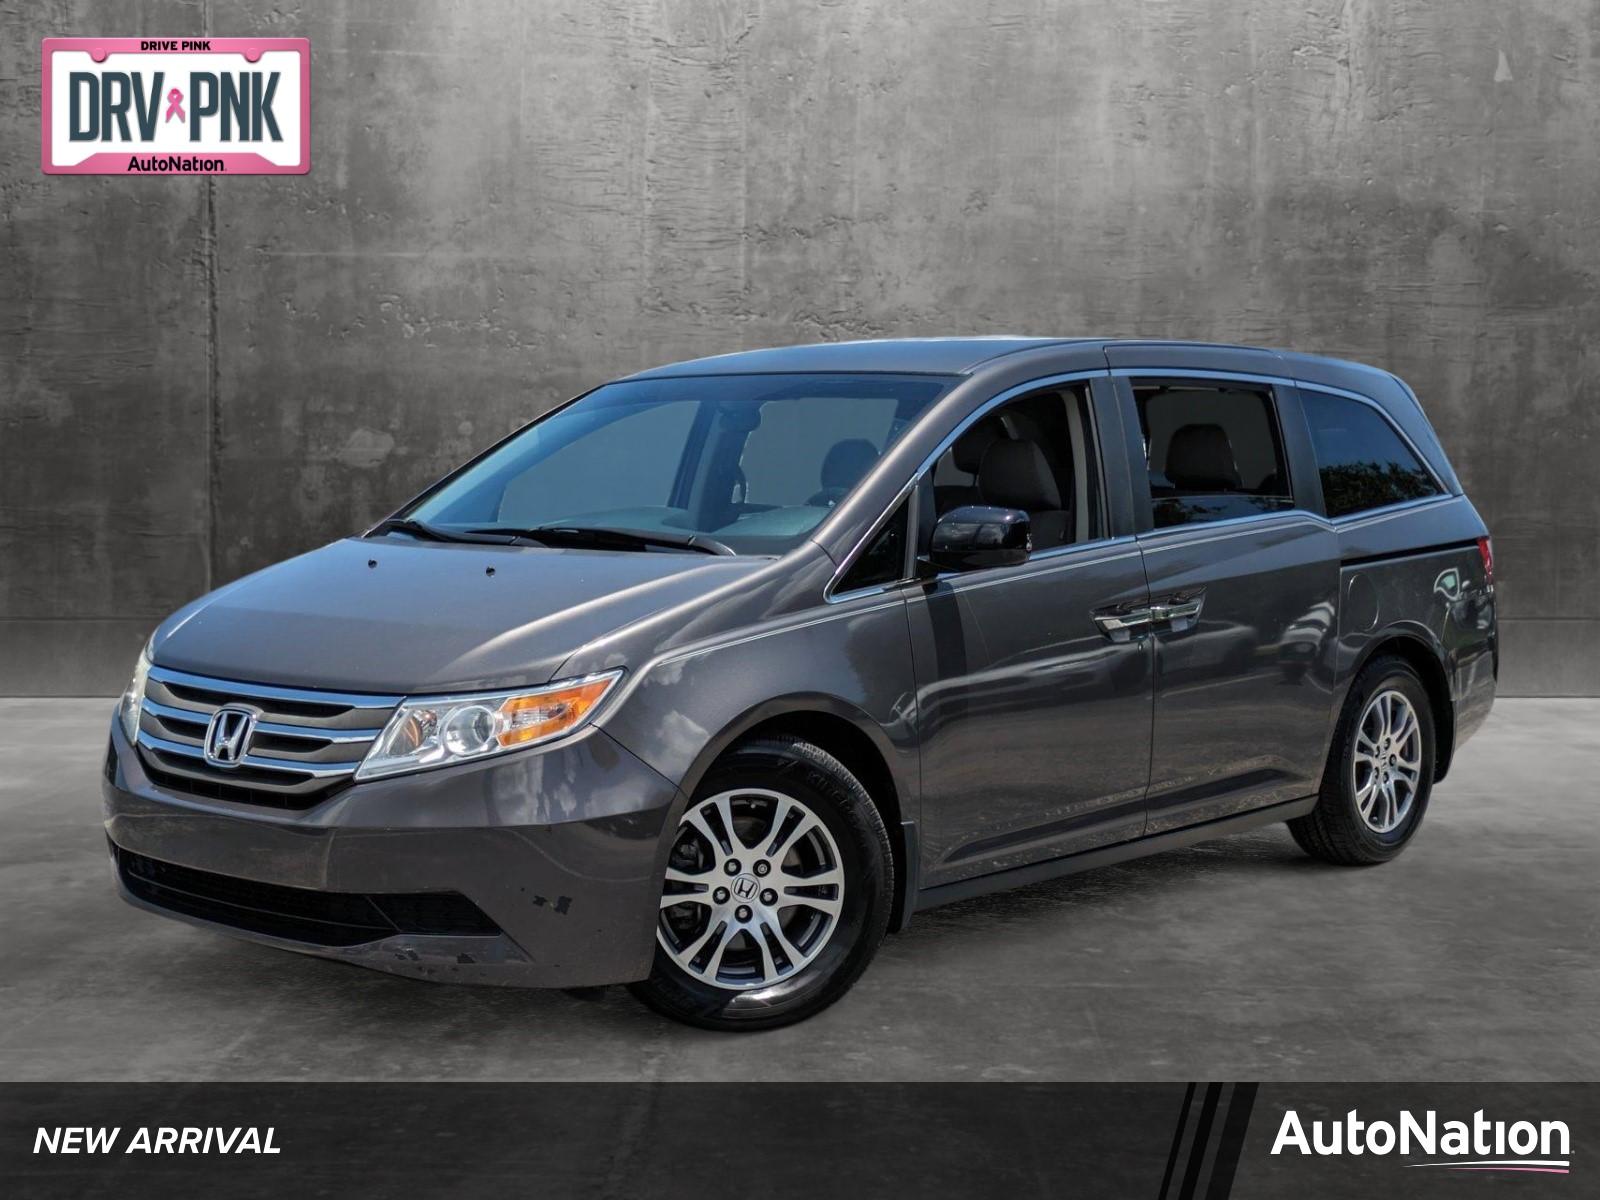 2013 Honda Odyssey Vehicle Photo in Clearwater, FL 33764